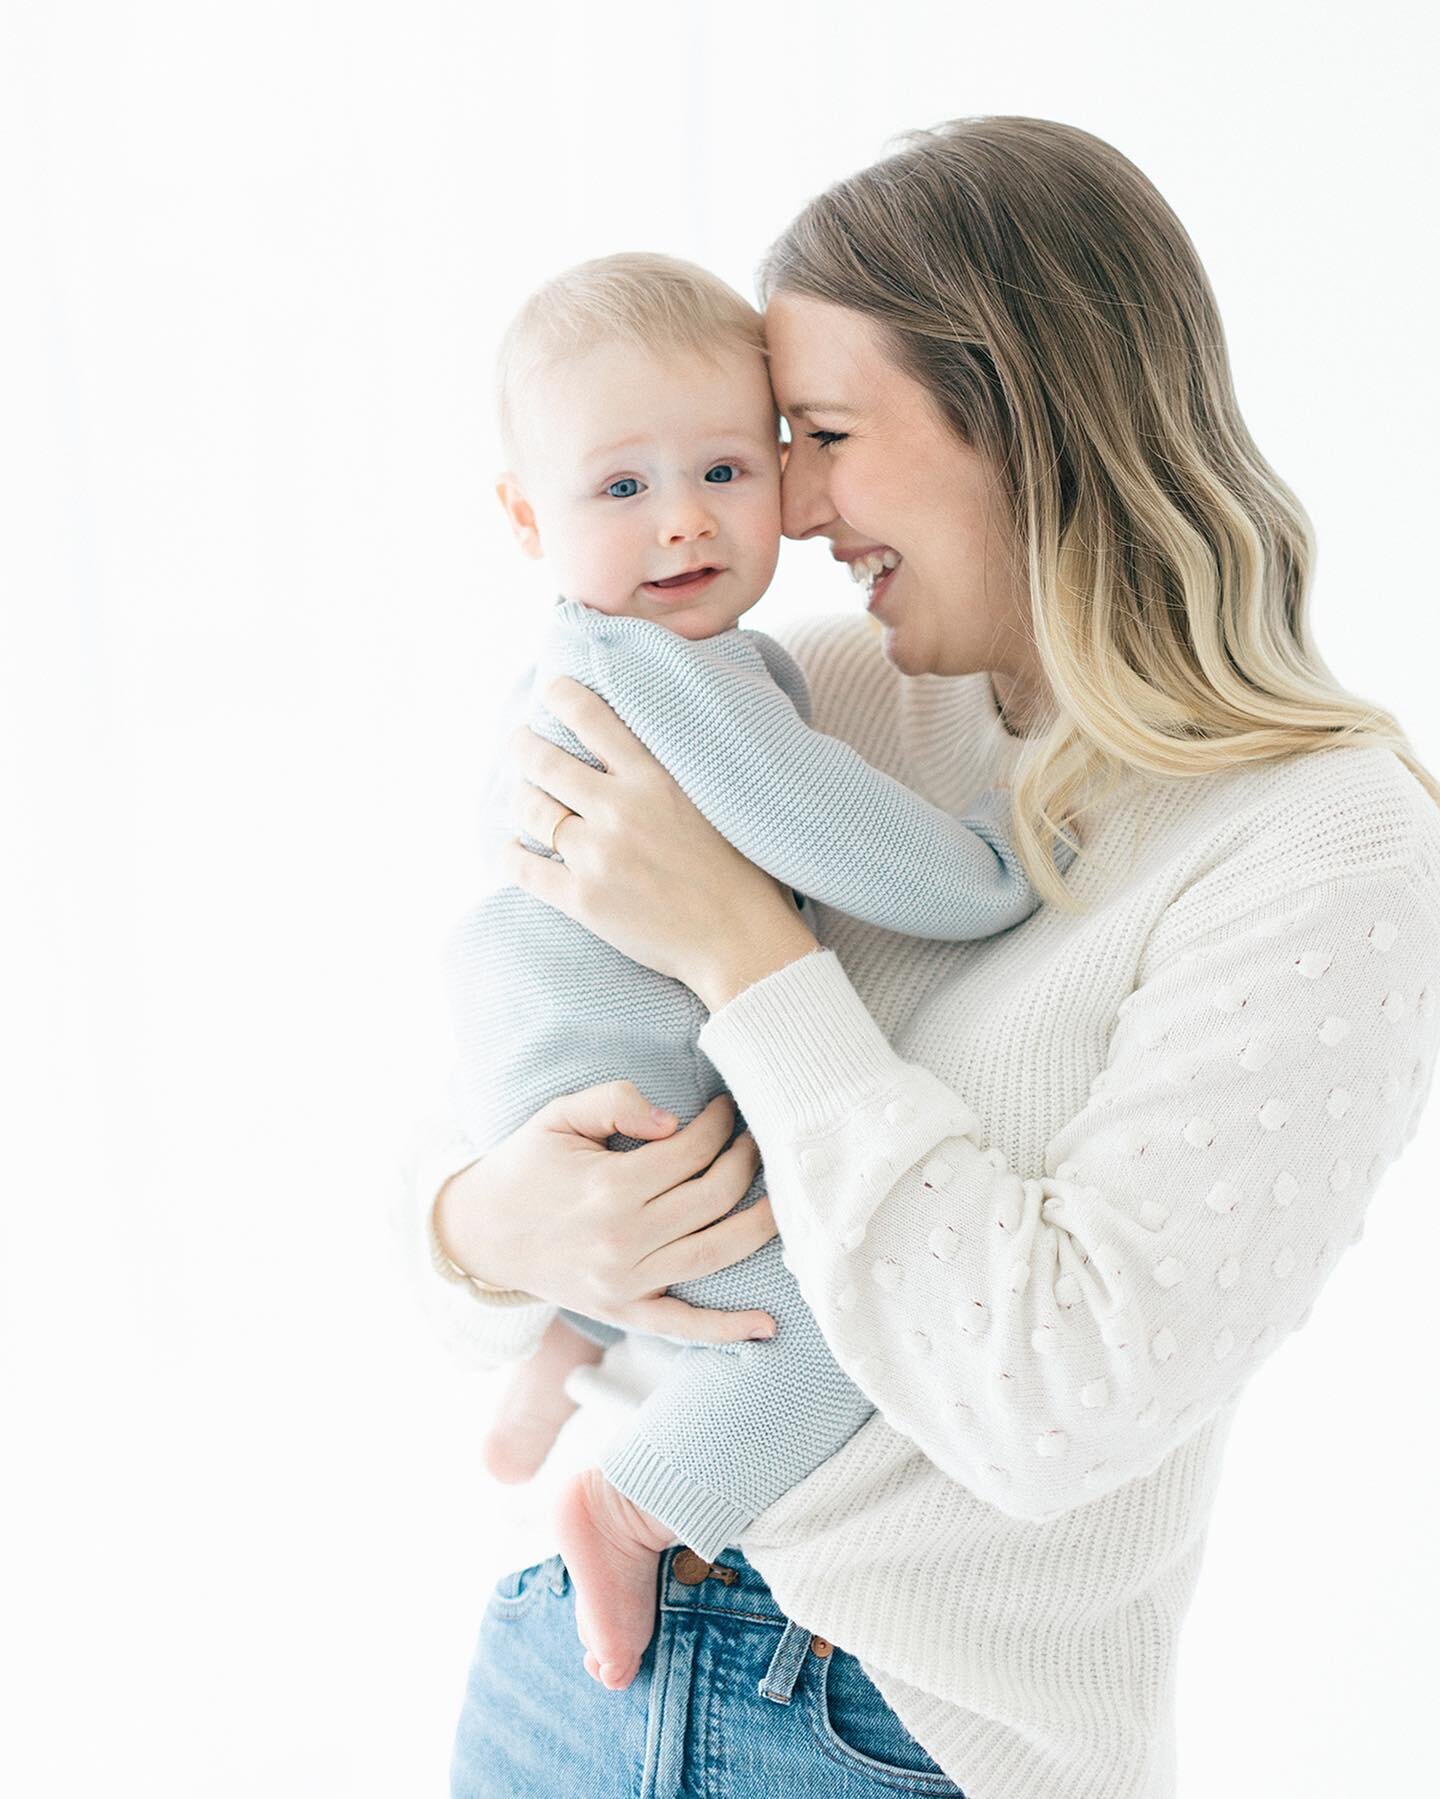 We LOVE 6 month sessions for all the snuggles! 

And the smiles and laughter. 

#fullservicephotographer #EuporaMS #EuporaMSphotographer #StarkvilleMSphotographer #ColumbusMSphotographer